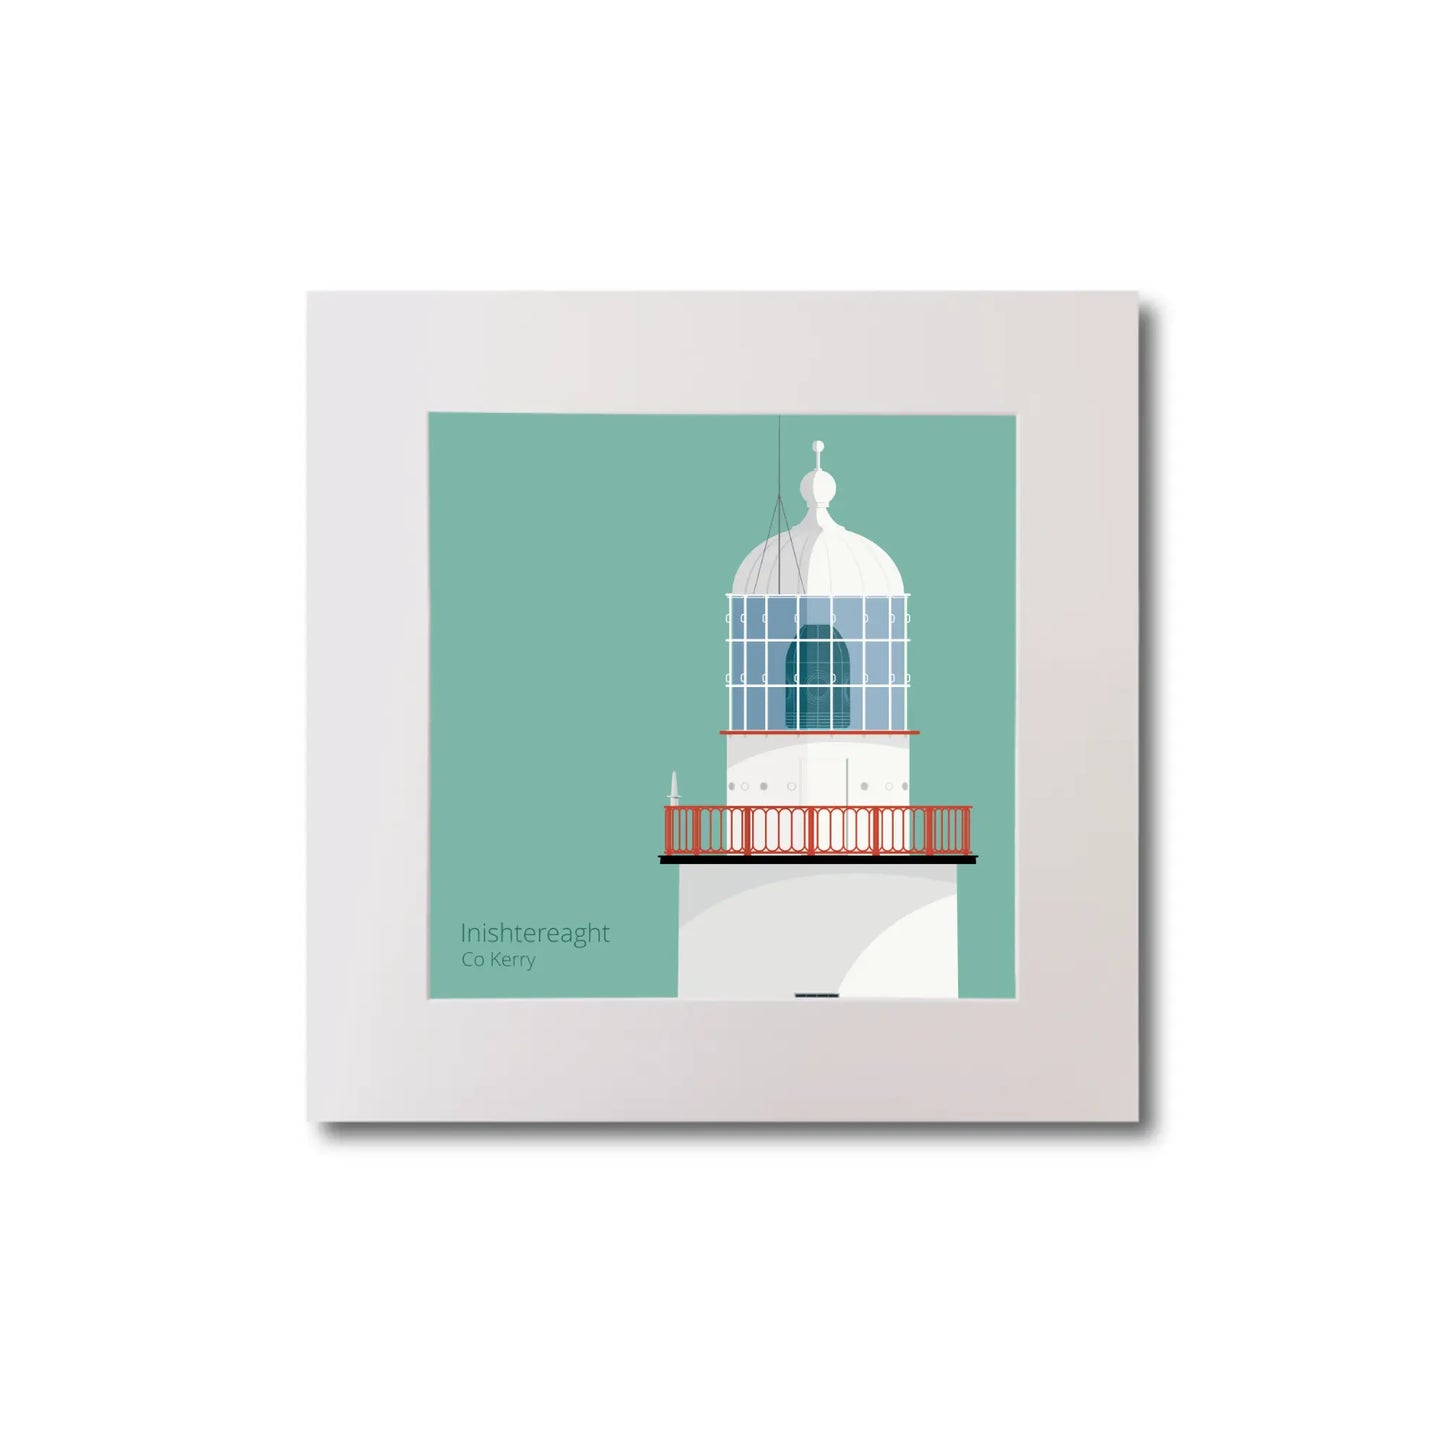 Illustration of Inistearaght lighthouse on an ocean green background, mounted and measuring 20x20cm.